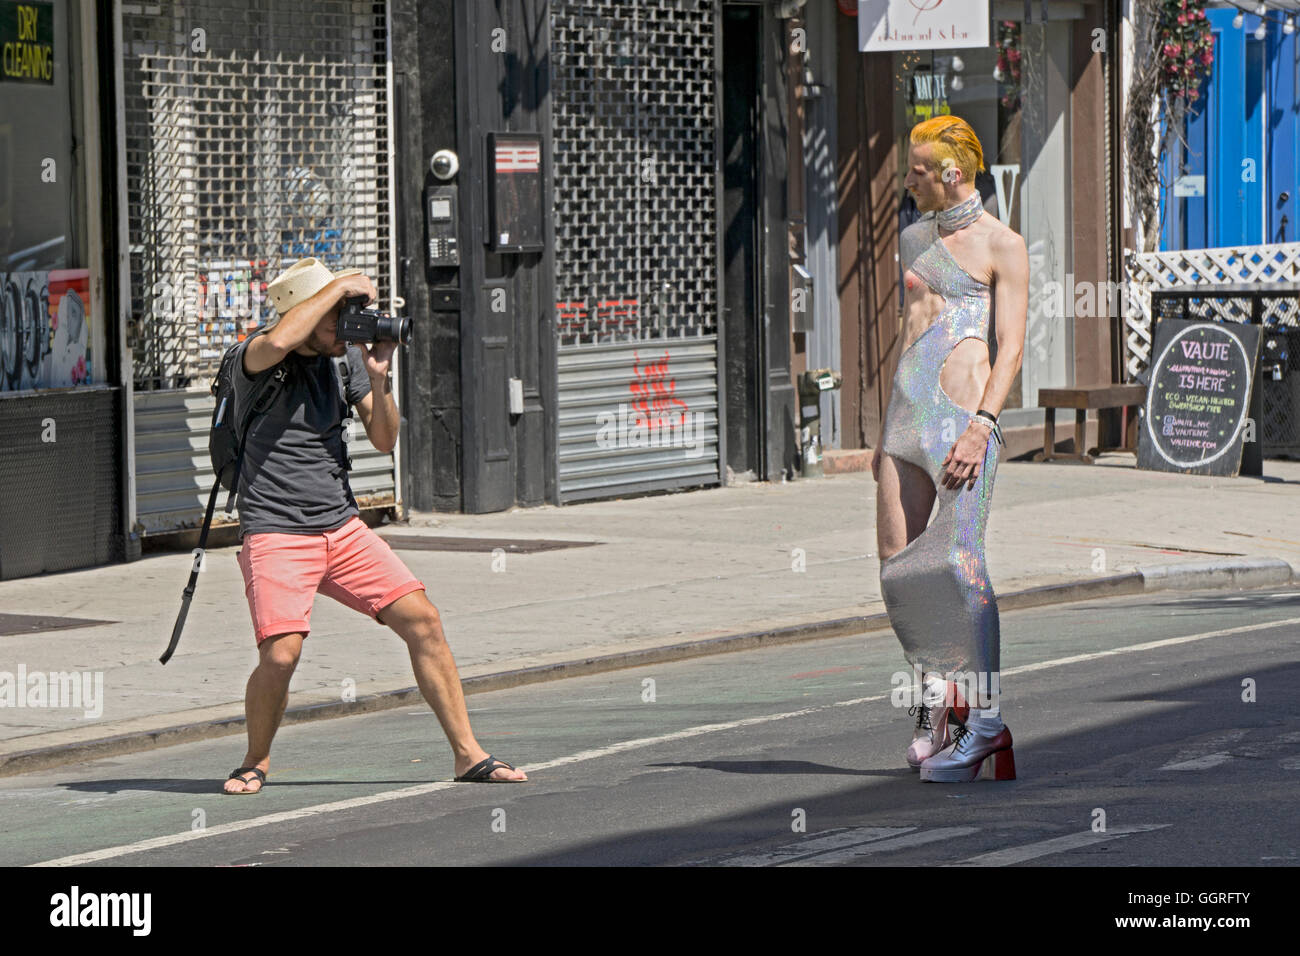 A photographer taking pictures of a man with gold hair in a long sparkling dress on Ludlow St. in Lower Manhattan, New York City Stock Photo